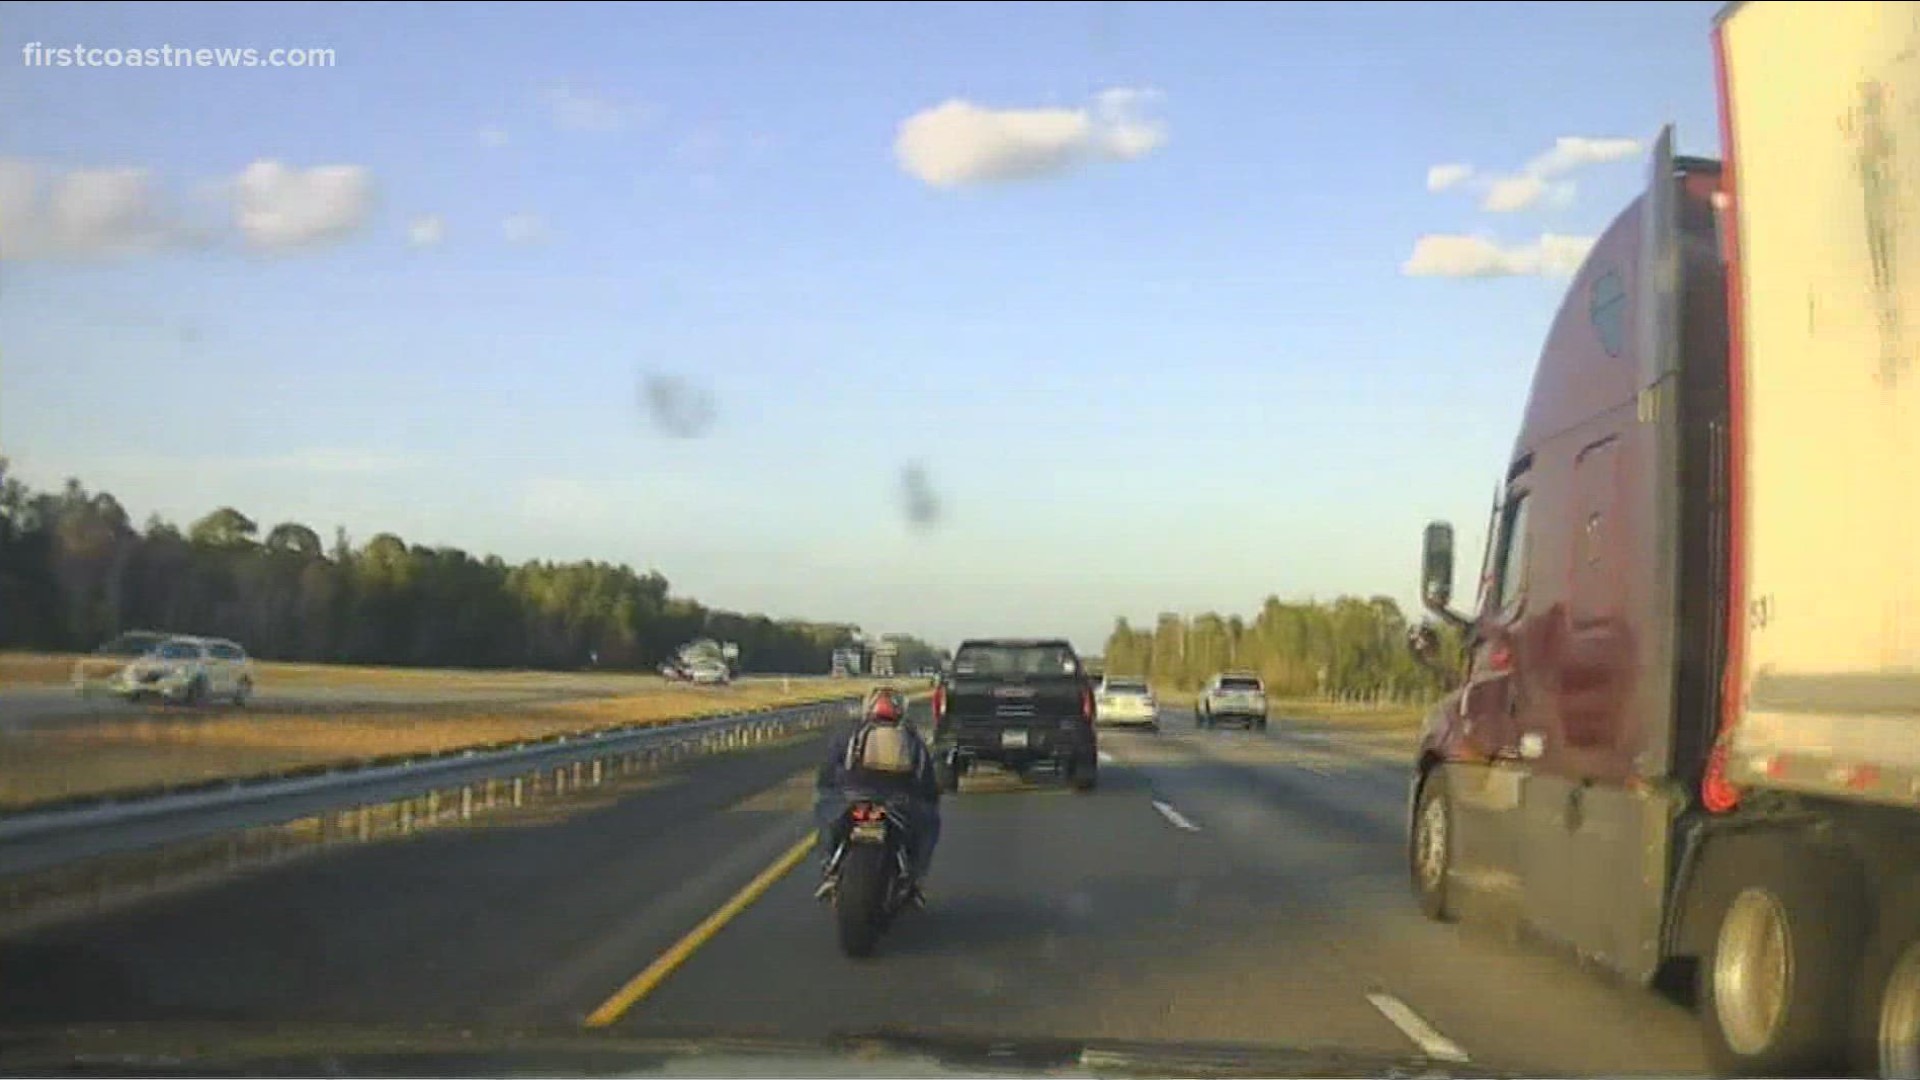 The motorcyclist drove more than 100 miles an hour on I-95.